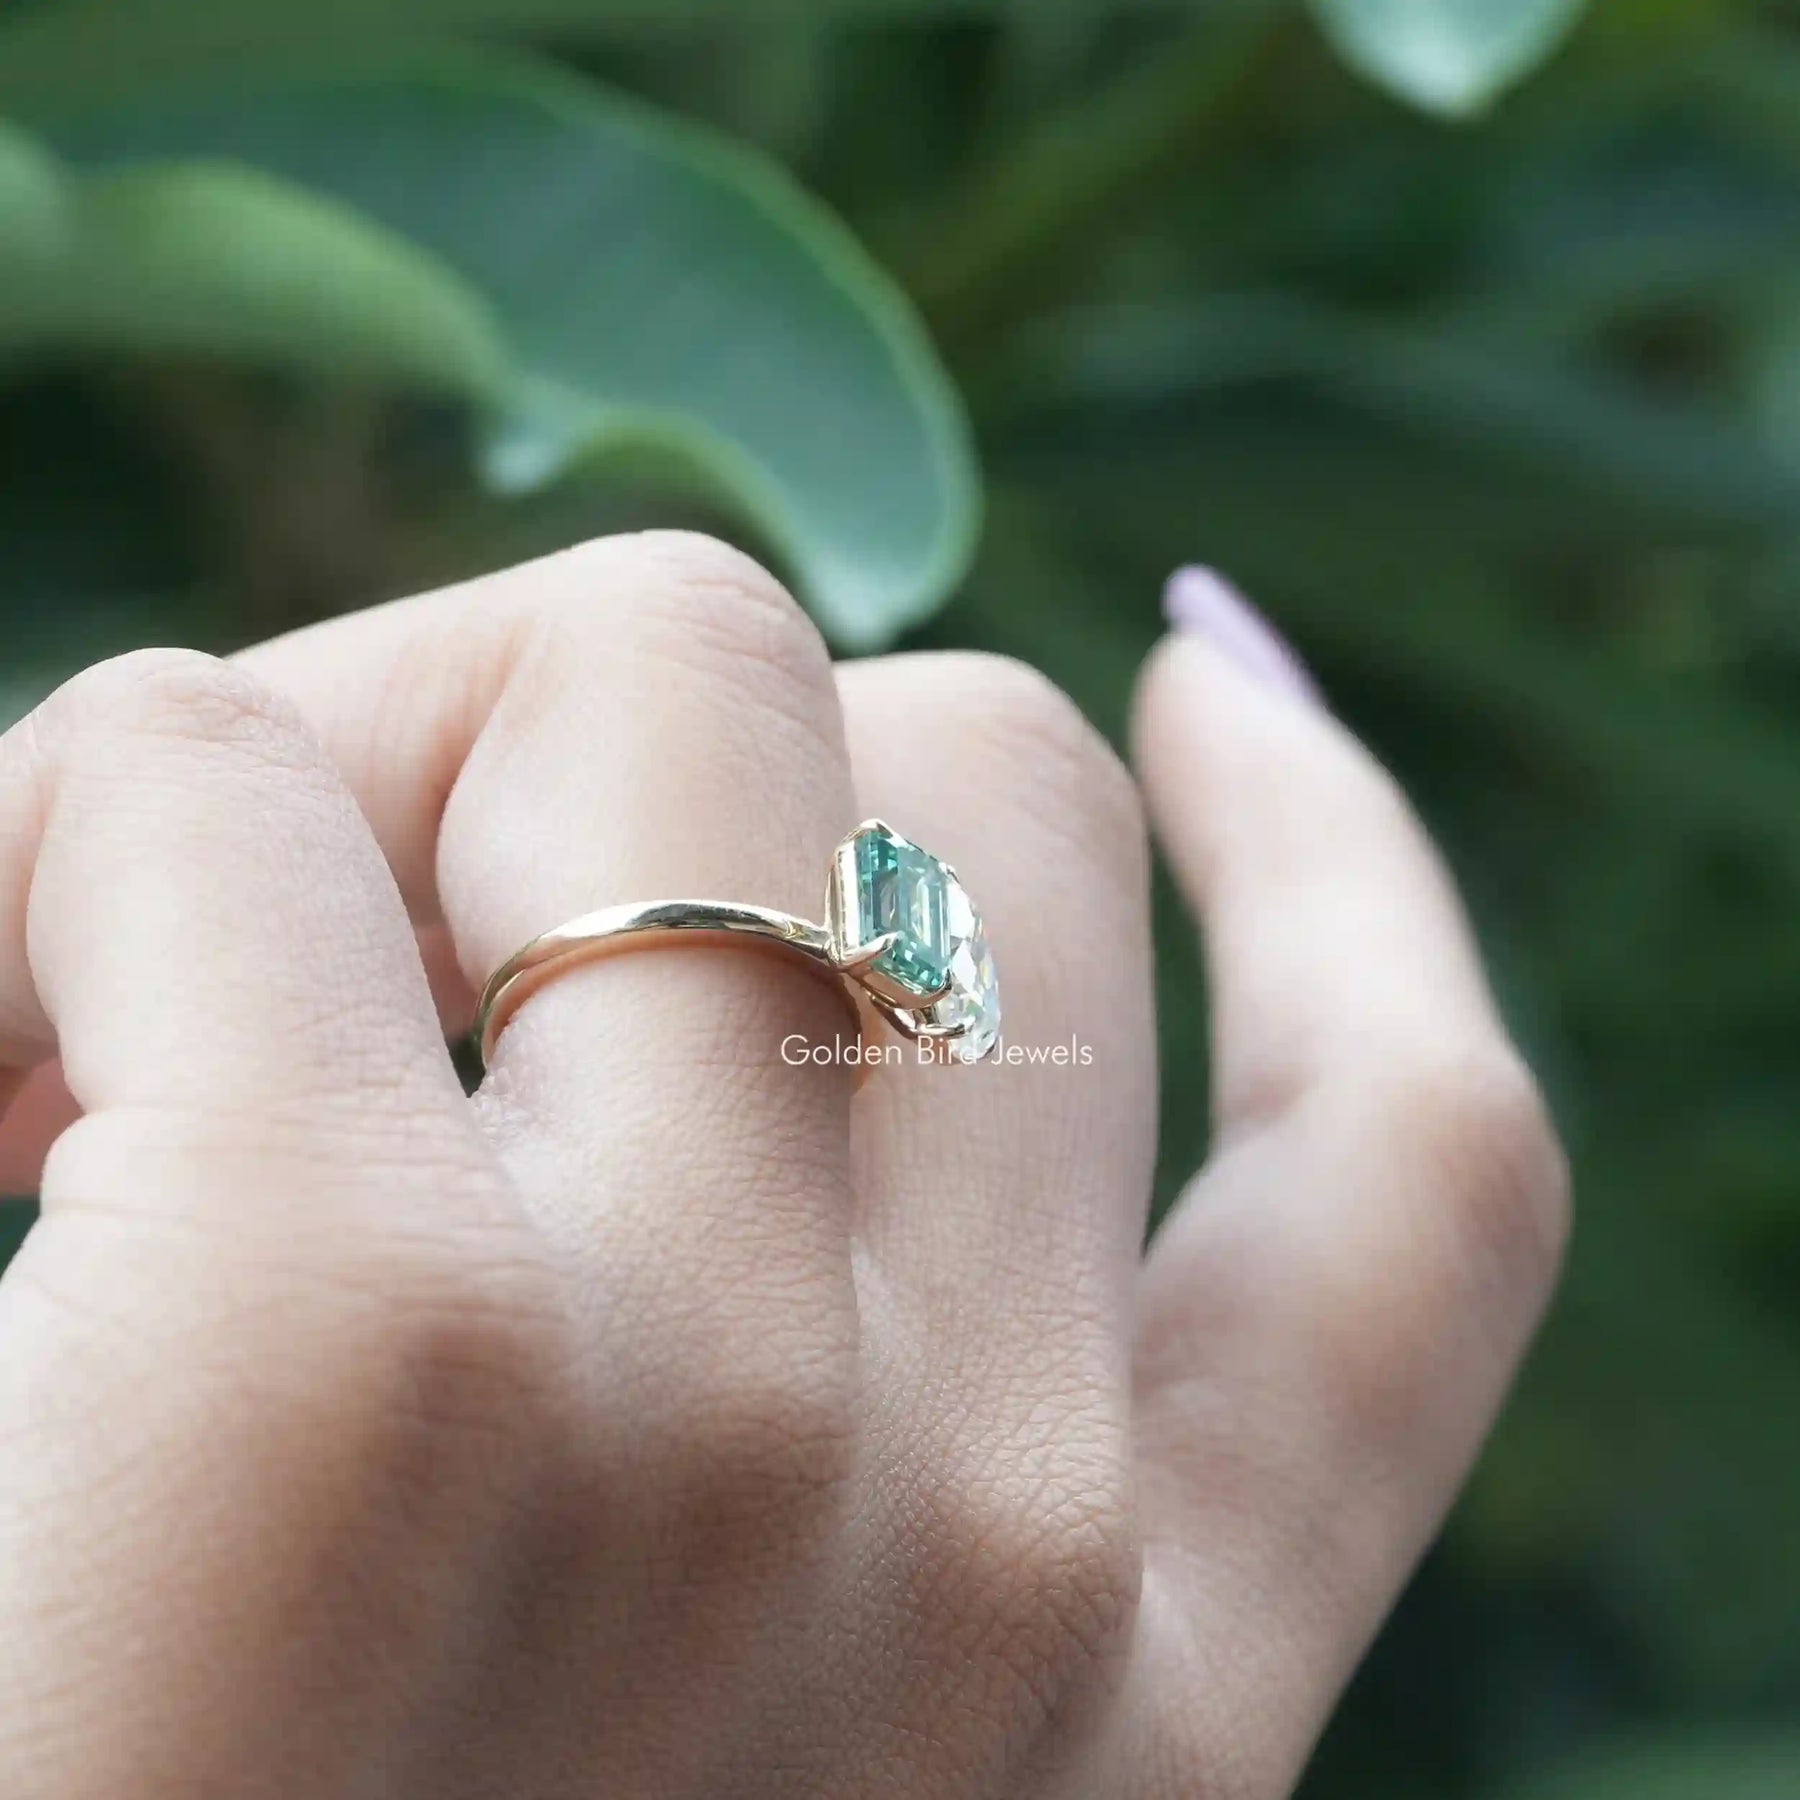 [In Finger a Colorless Pear And Aqua Blue Emerald Cut Moissanite Two Stone Ring]-[Golden Bird Jewels]